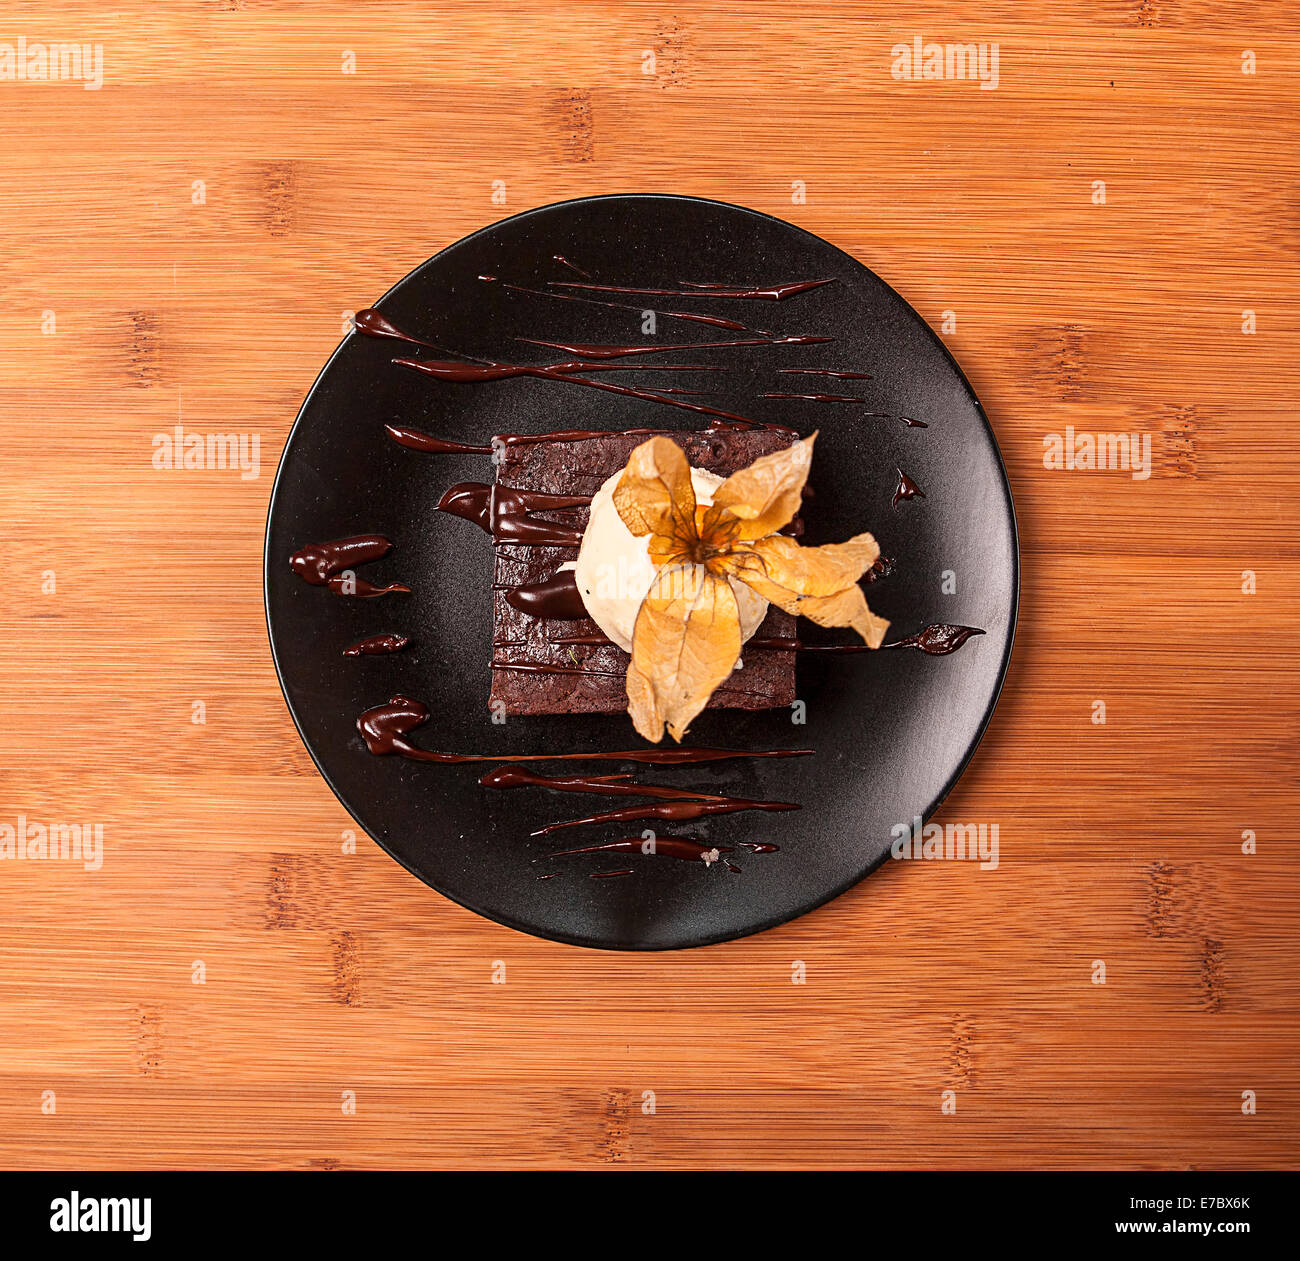 Brownie cake with chocolate and vanilla ice cream on a dark plate on a wooden table Stock Photo